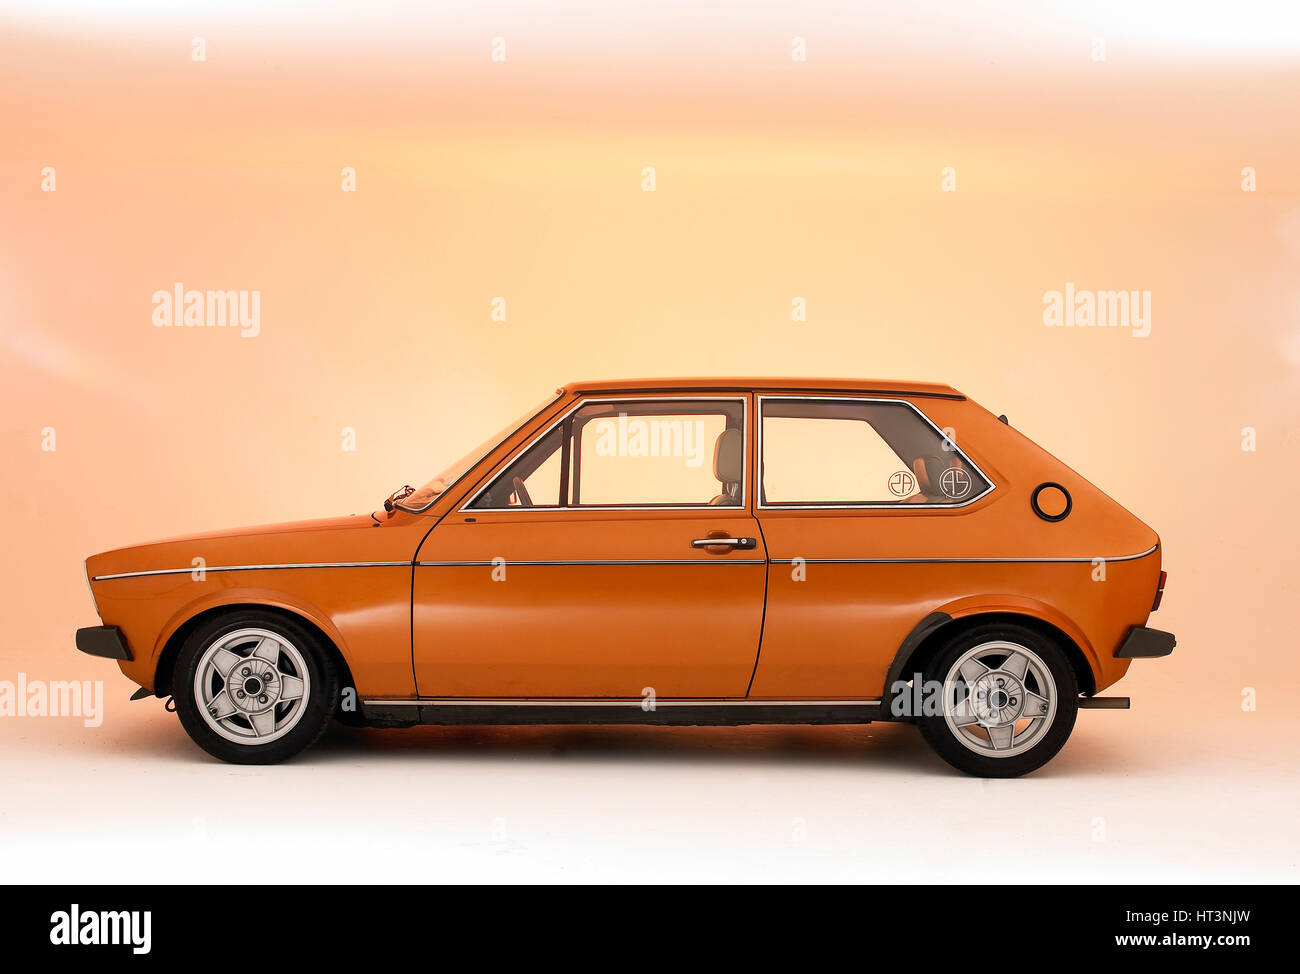 1978 VW Polo (Customised) Artist: Unknown Stock Photo - Alamy